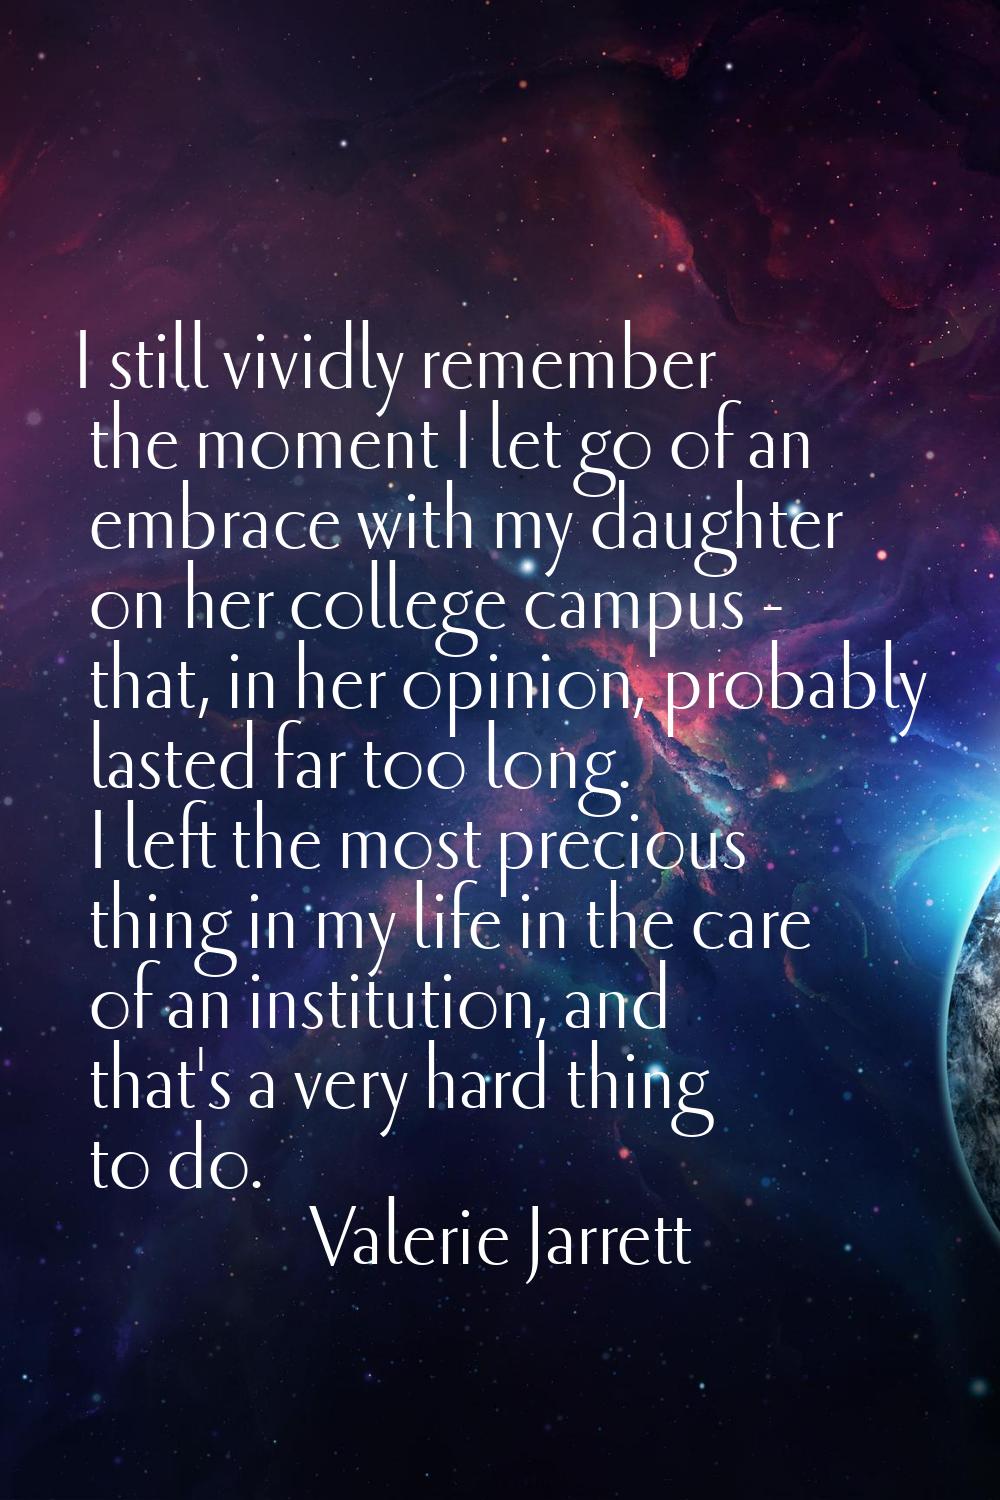 I still vividly remember the moment I let go of an embrace with my daughter on her college campus -